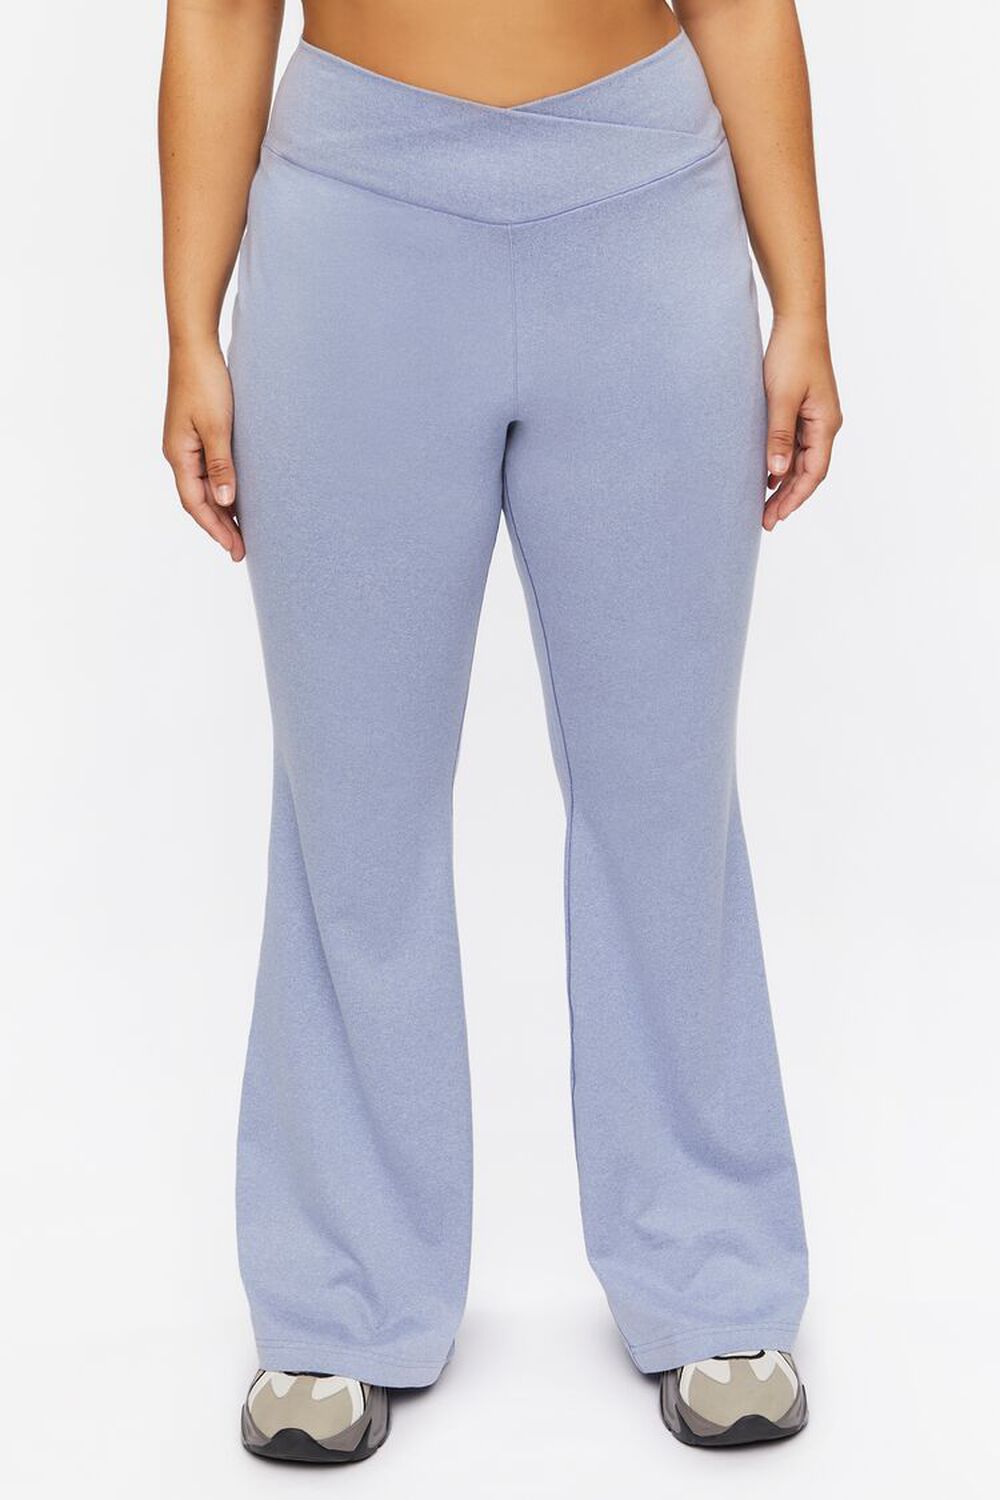 BLUE MIRAGE Plus Size Crossover Flare Pants, image 2